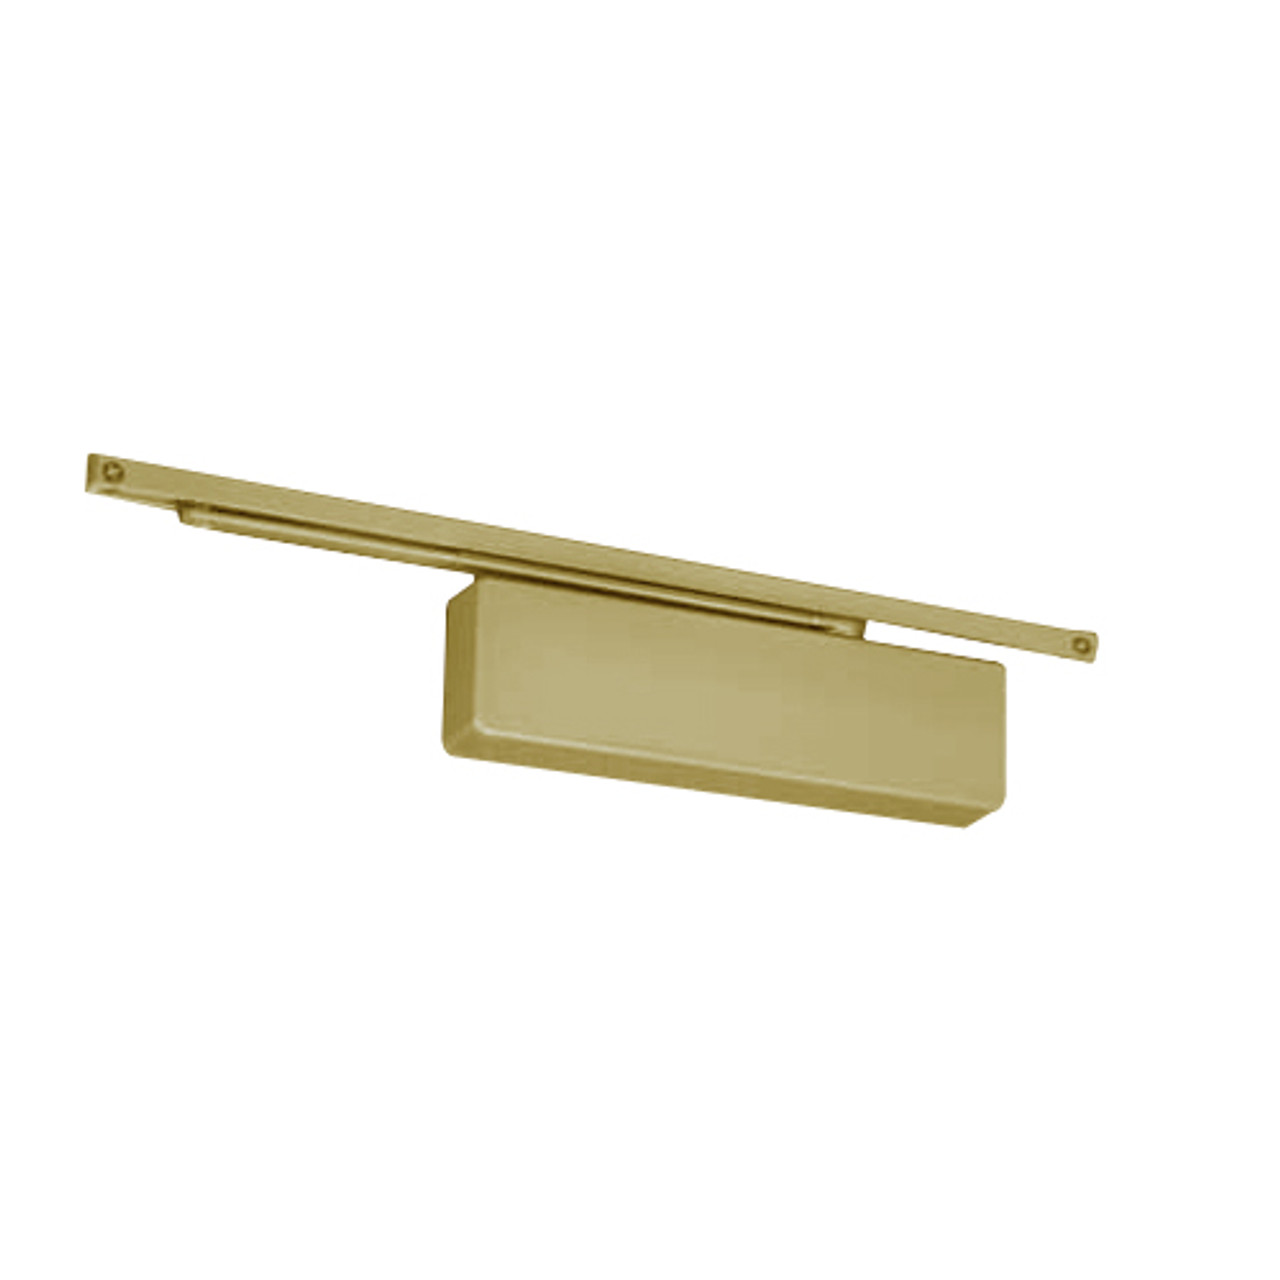 7540STH-M-696 Norton 7500 Series Hold Open Institutional Door Closer with Pull Side Low Profile Slide Track in Gold Finish